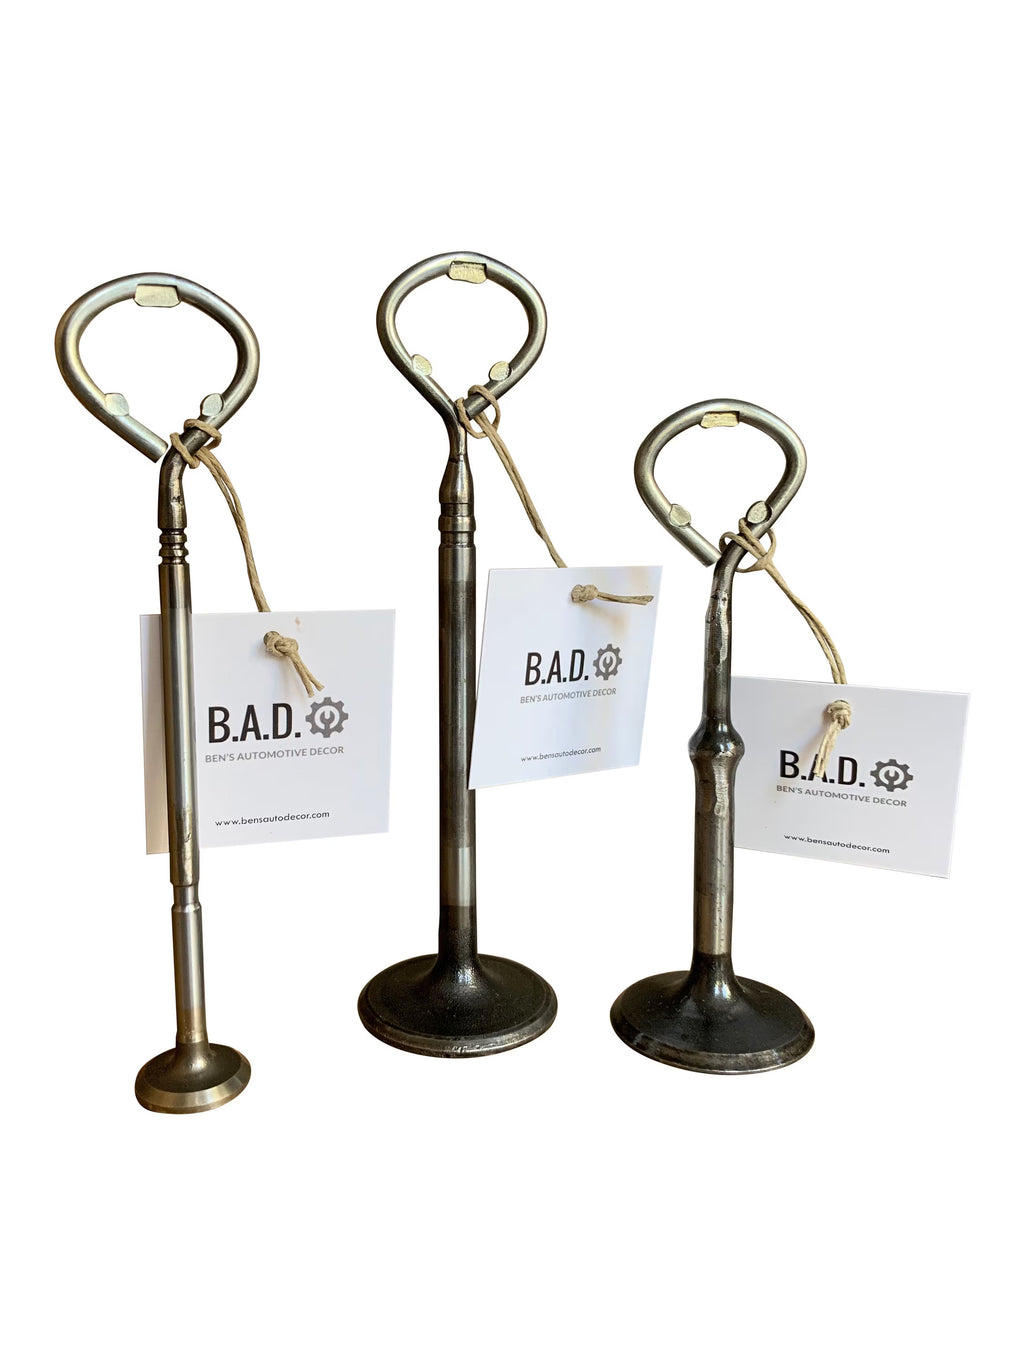 Three bottle openers made out of car engine valves with tags reading, "B.A.D., Ben's Automotive Decor"